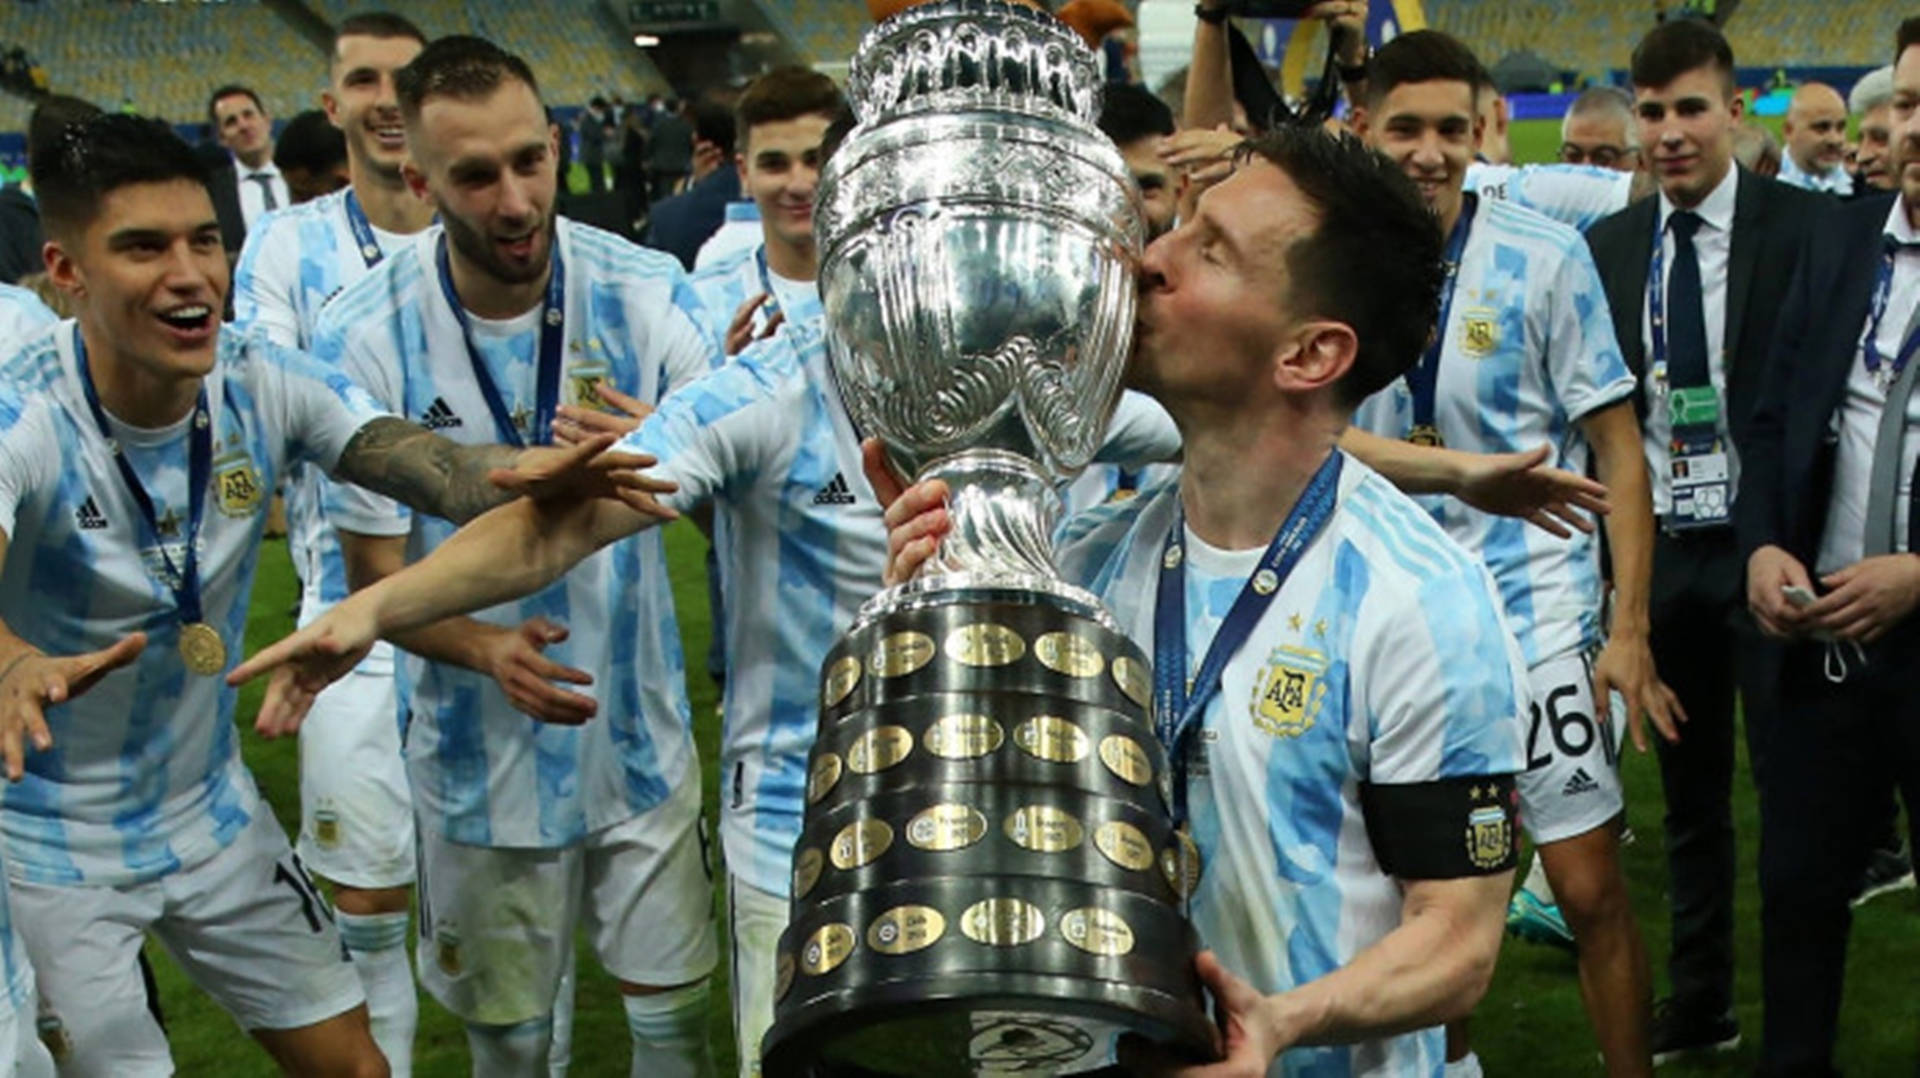 "Lionel Messi Celebrating with the Championship Trophy Representing Argentina" Wallpaper